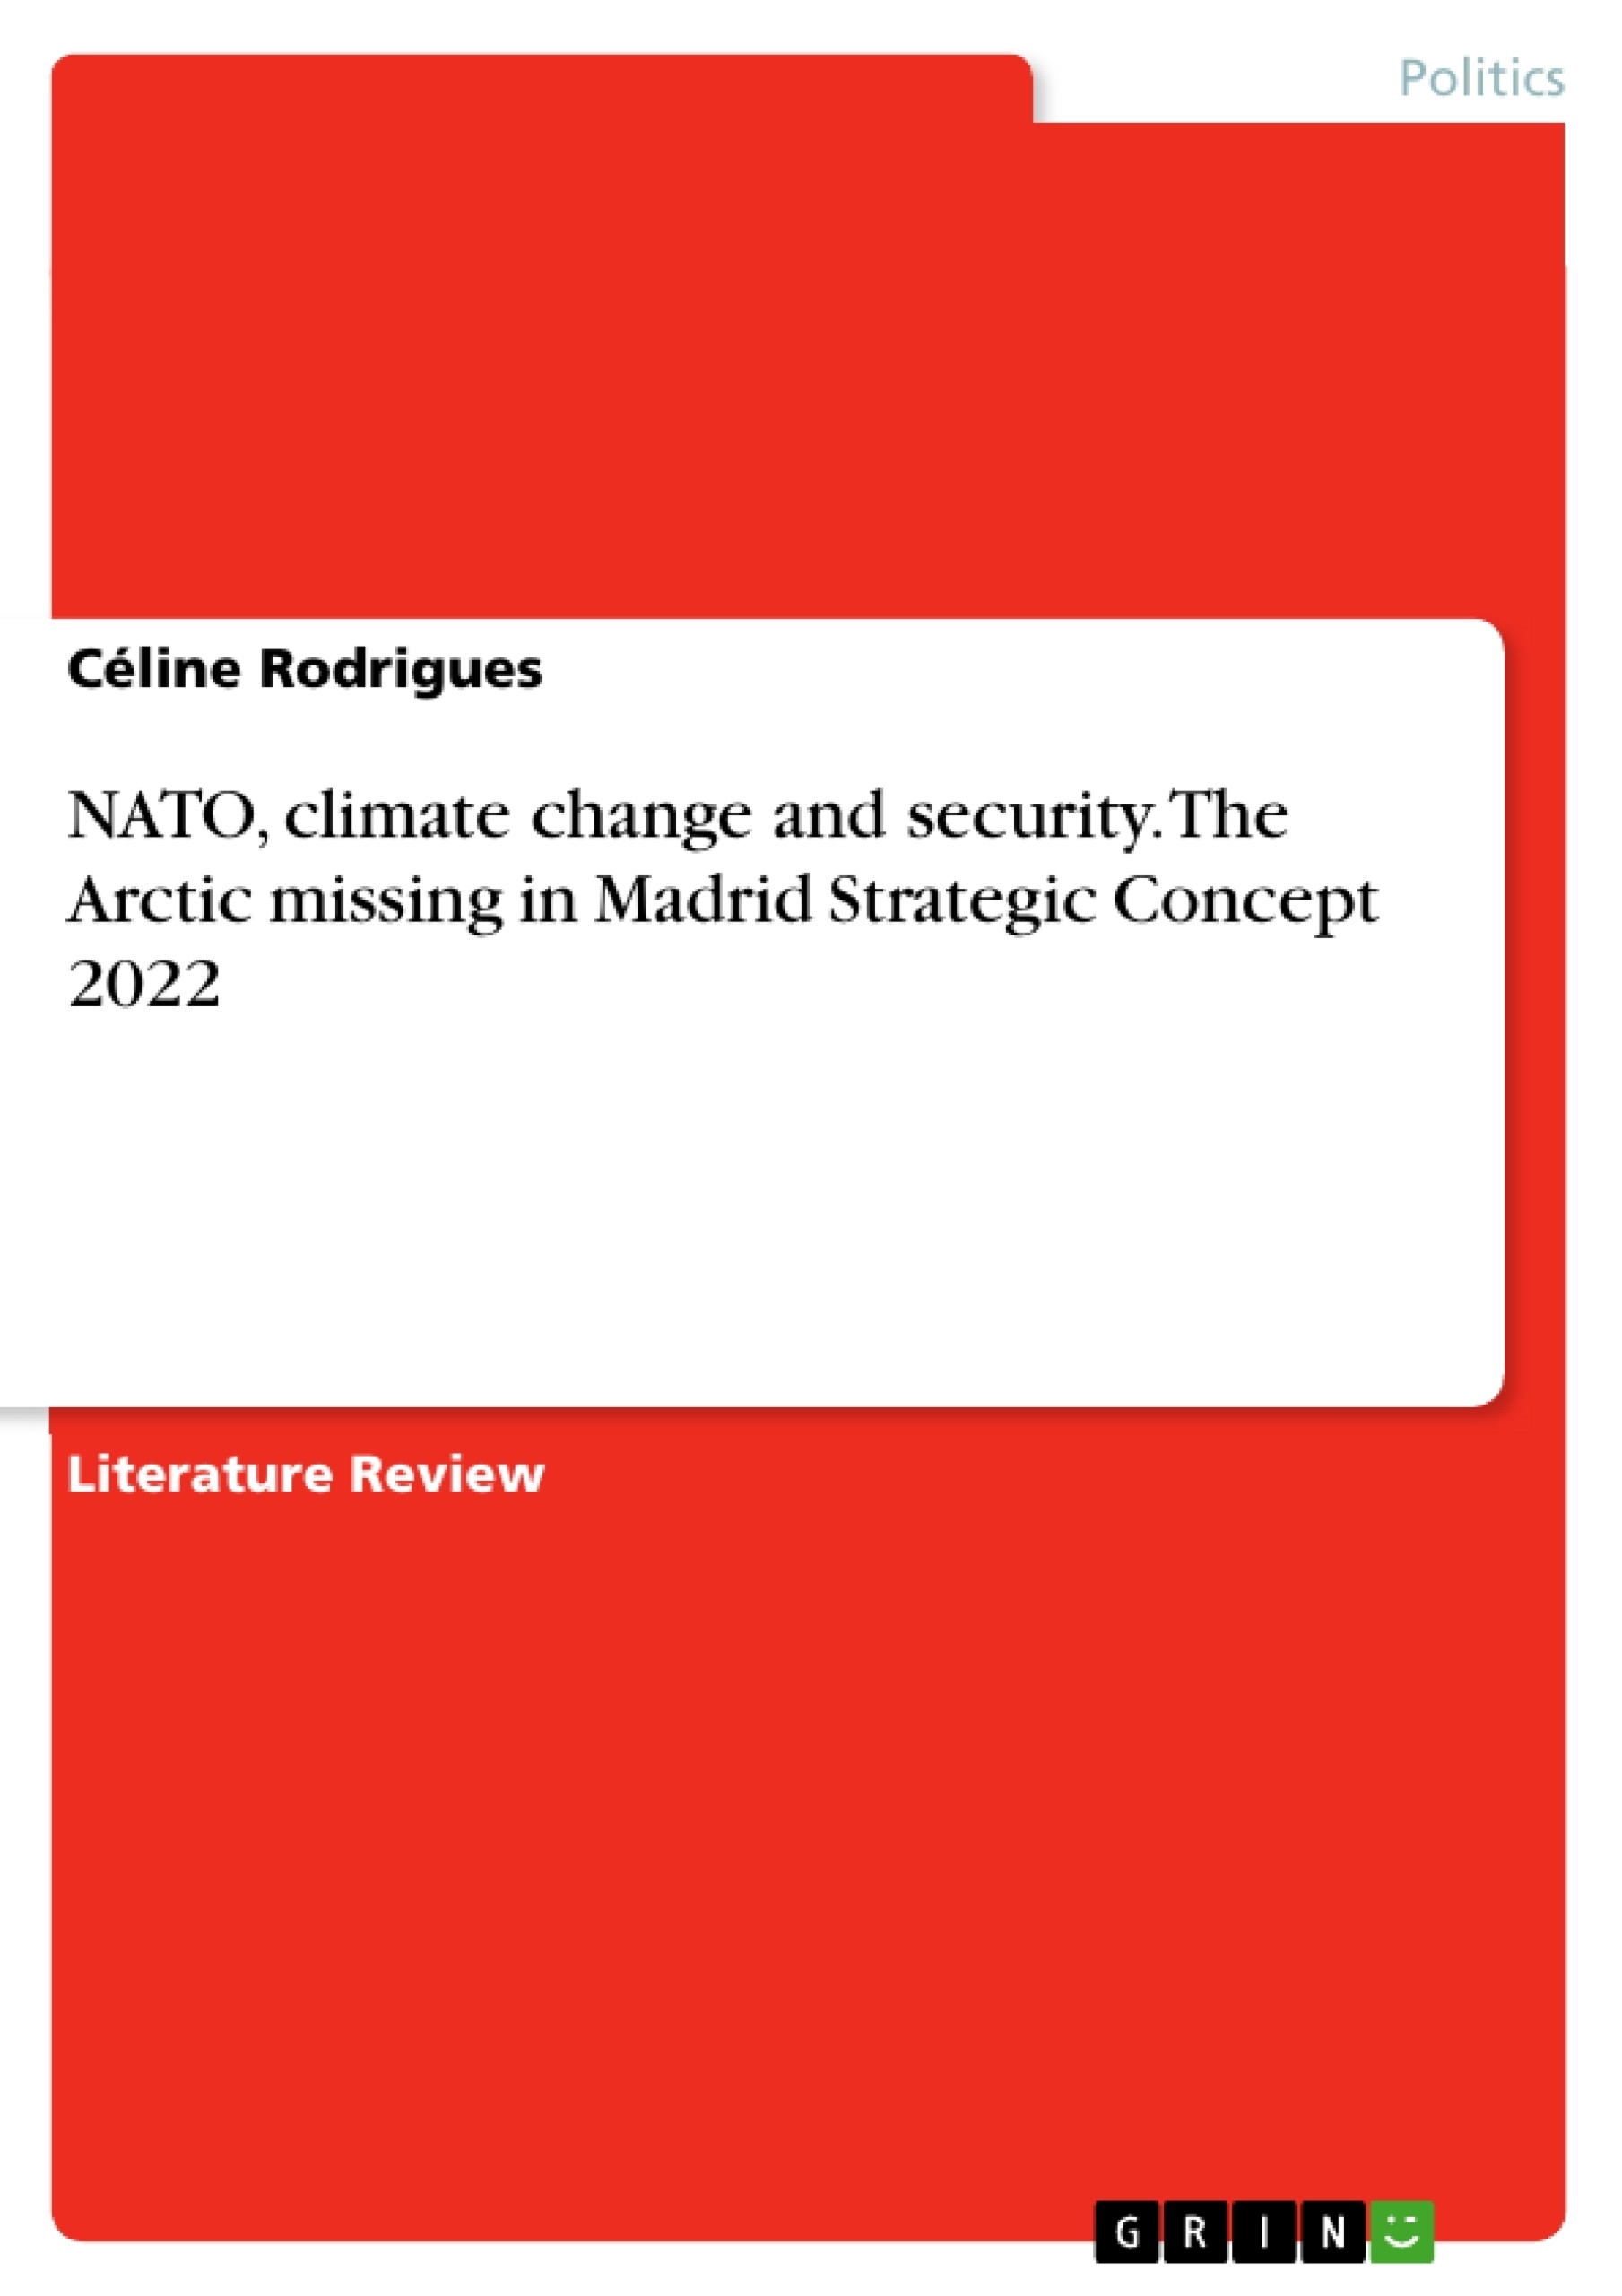 Título: NATO, climate change and security. The Arctic missing in Madrid Strategic Concept 2022